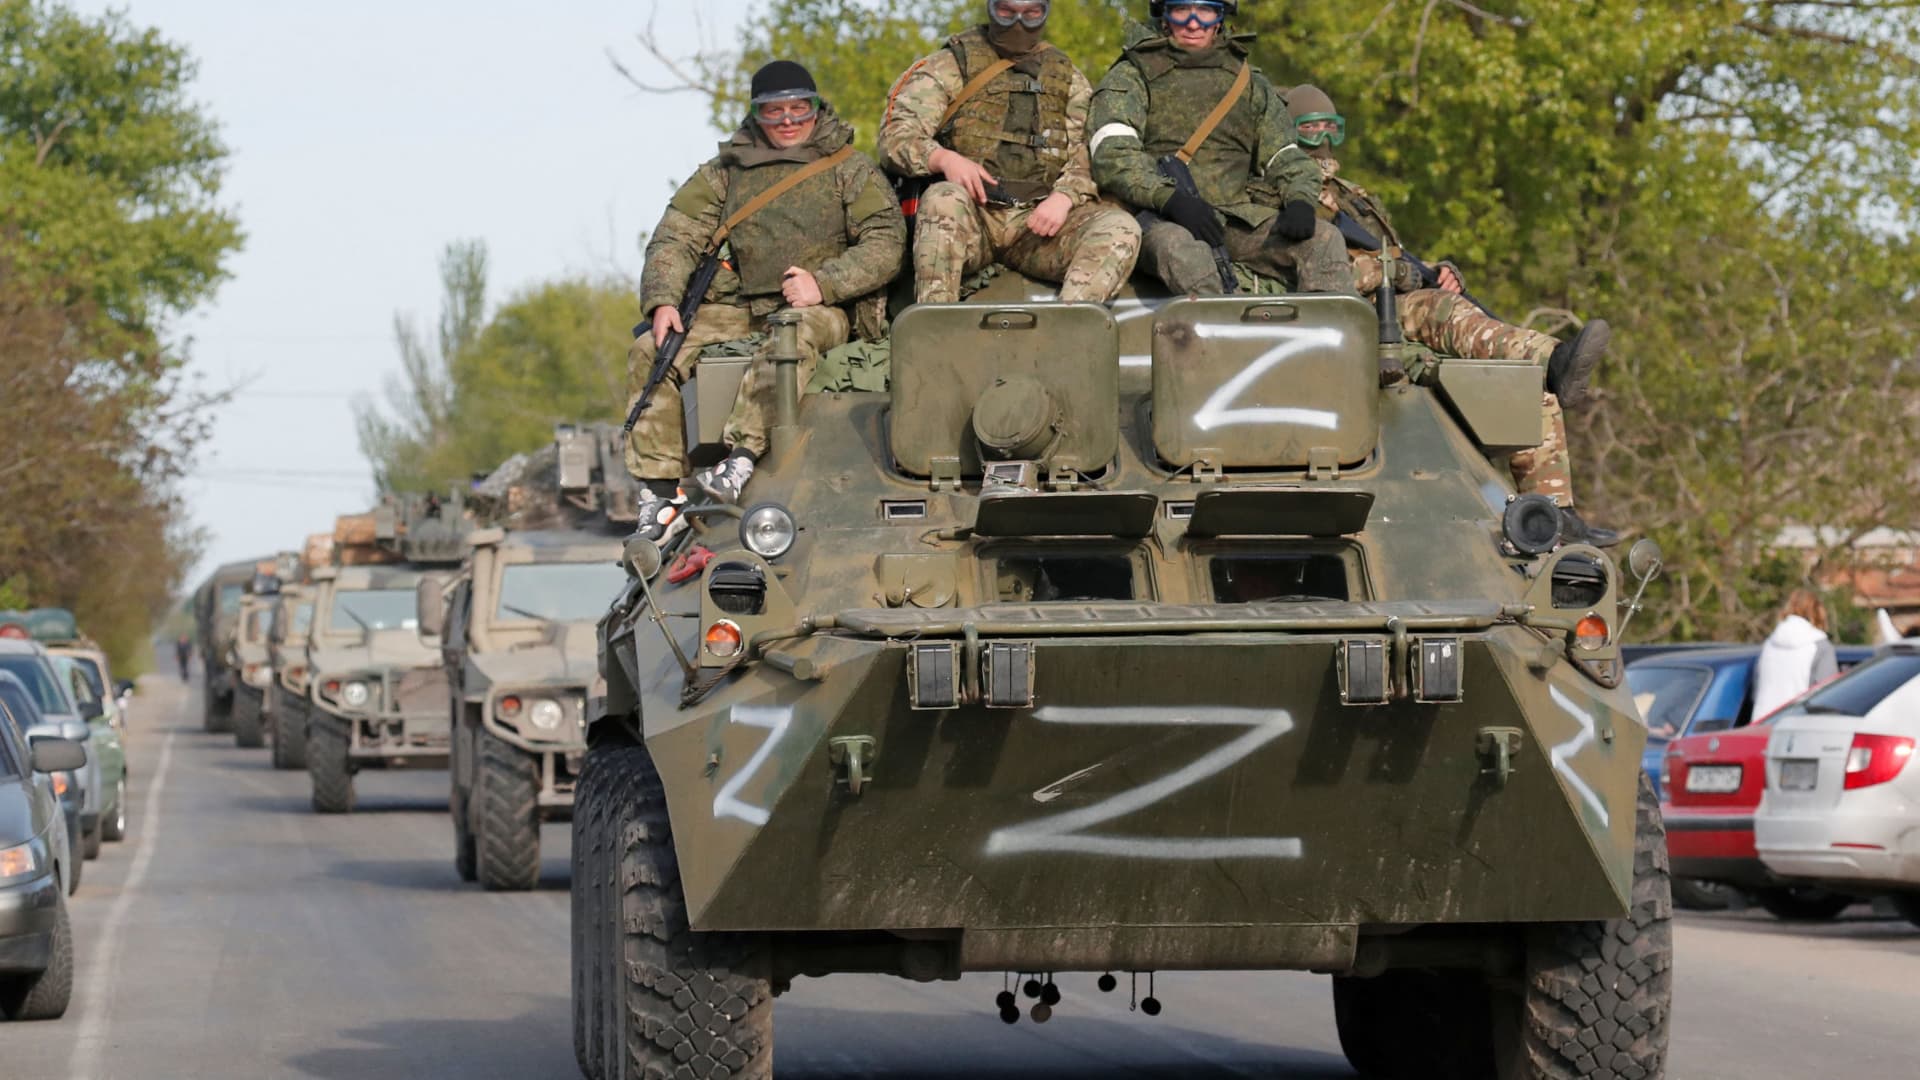 Service members of pro-Russian troops ride an armoured personnel carrier during Ukraine-Russia conflict in the village of Bezimenne in the Donetsk Region, Ukraine May 6, 2022.